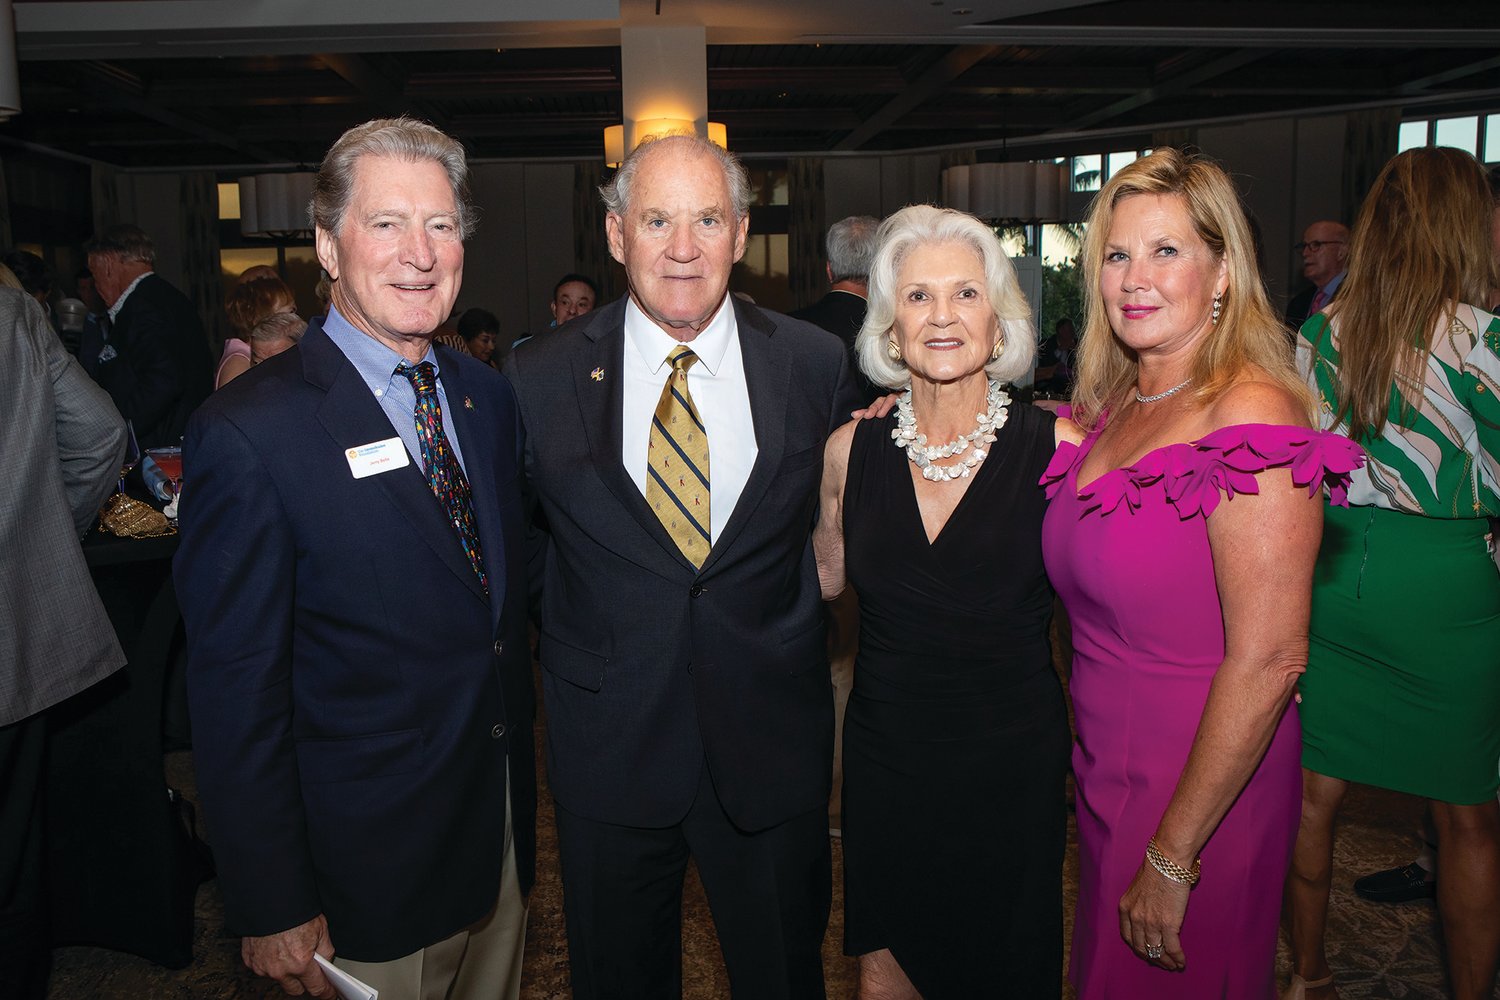 The Immokalee Foundation has announced Janet and Jerry Belle and Carol and Tom Joseph as co-chairs of the 2022 Charity Classic Celebration. Left to right: Jerry Belle, Tom Joseph, Janet Belle, and Carol Joseph.